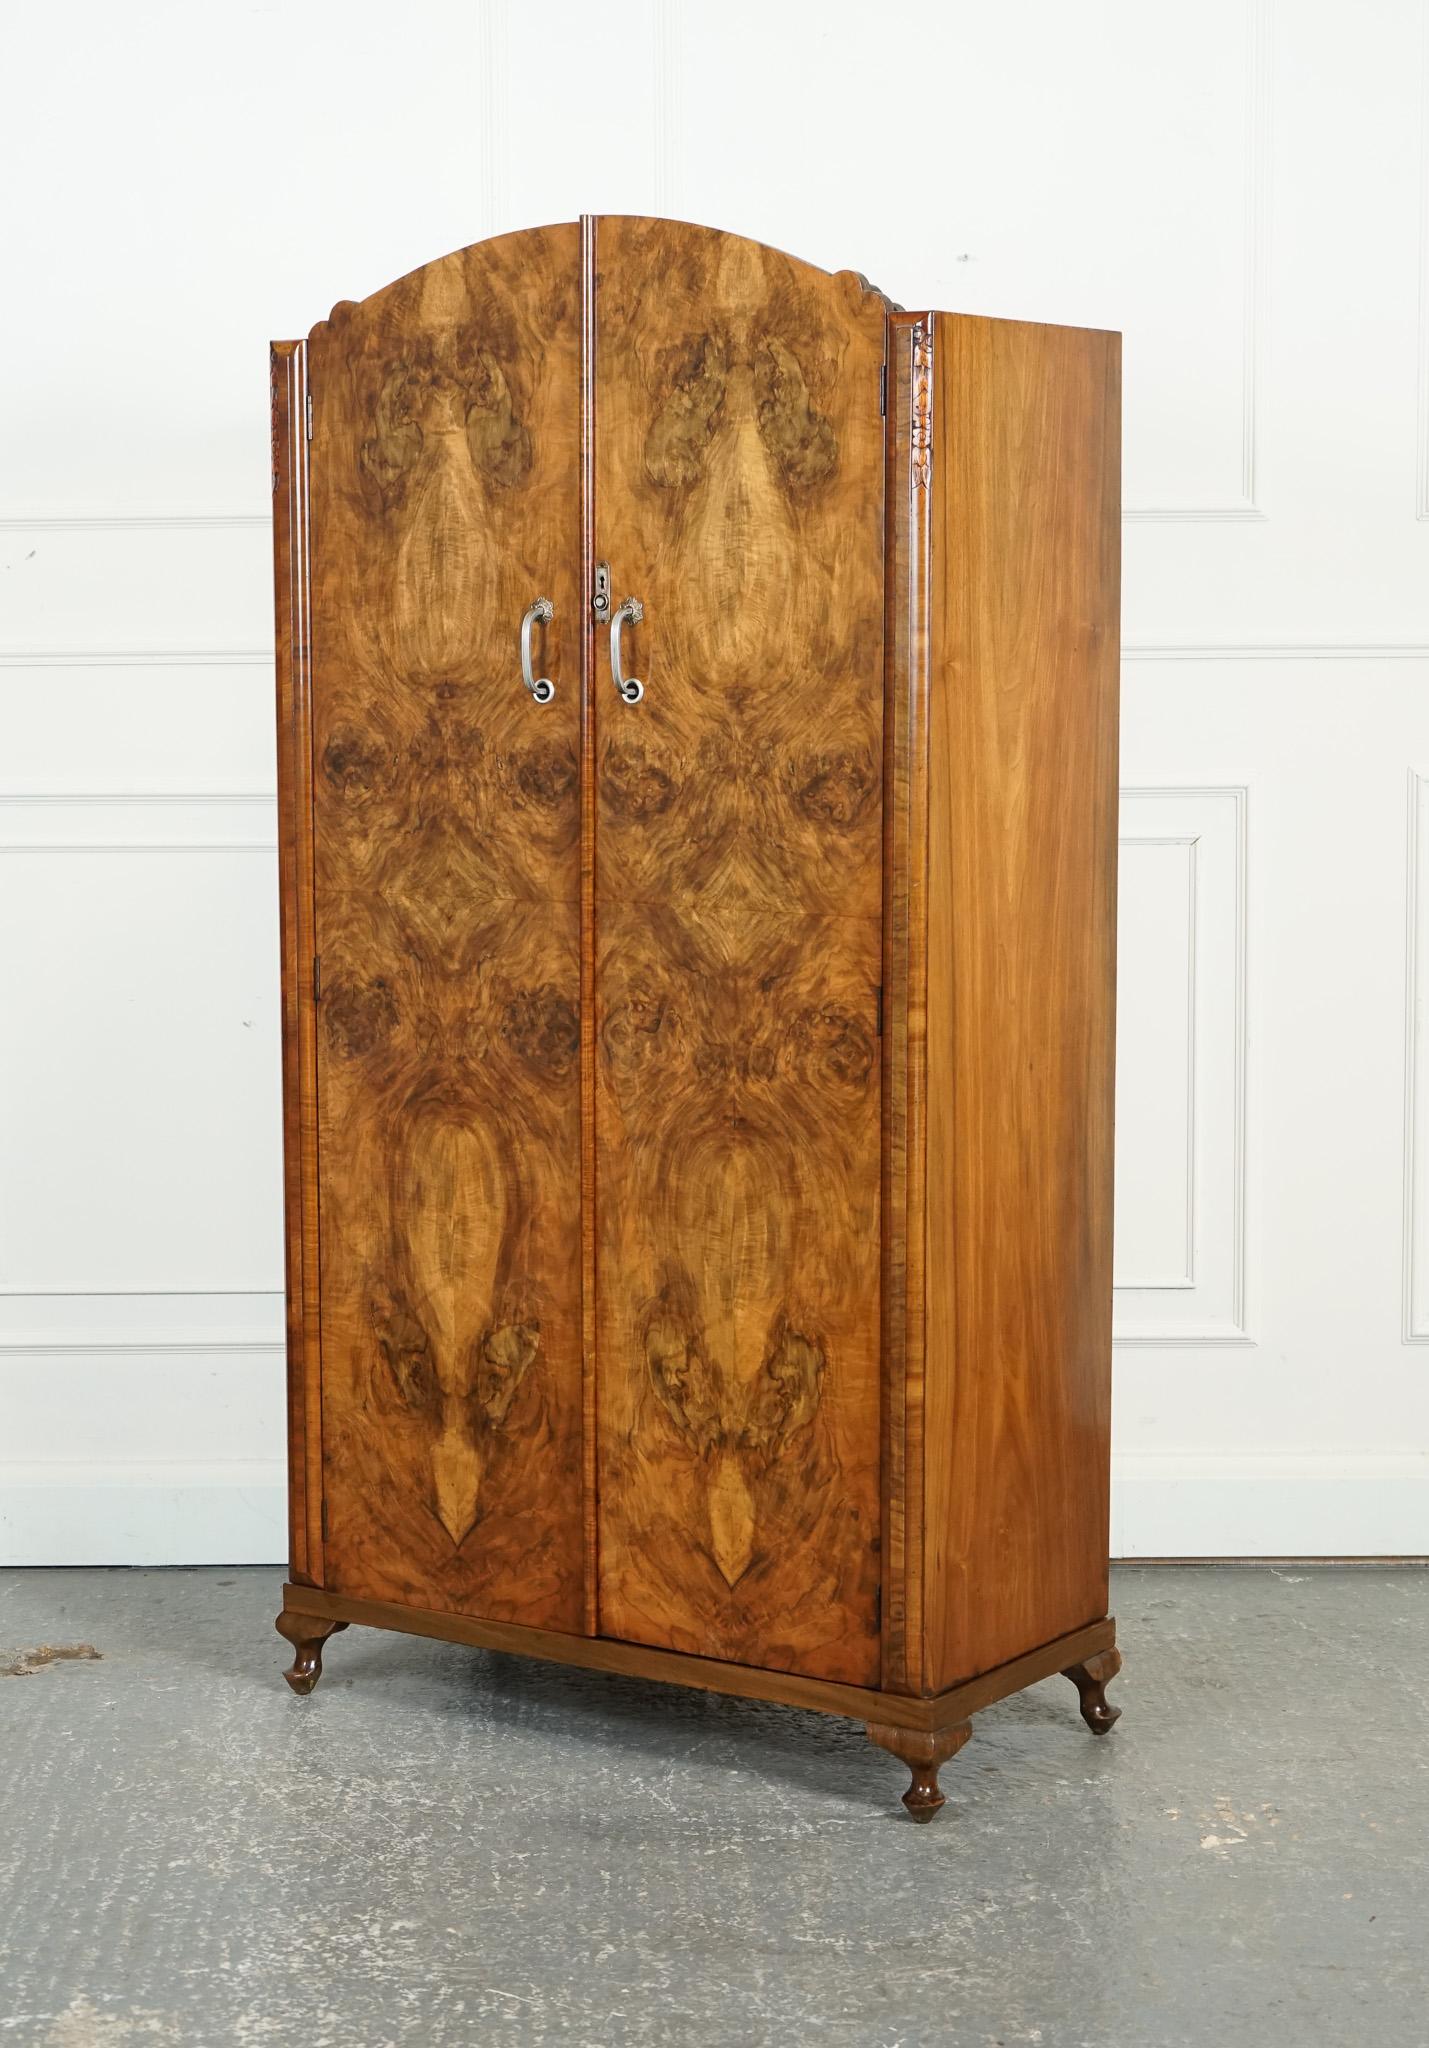 
We are delighted to offer for sale this Lovely Art Deco Burr Walnut Wardrobe. 

A lovely Art Deco burr walnut wardrobe is a stunning and sophisticated piece of furniture that epitomises the glamour and style of the Art Deco era. The use of burr